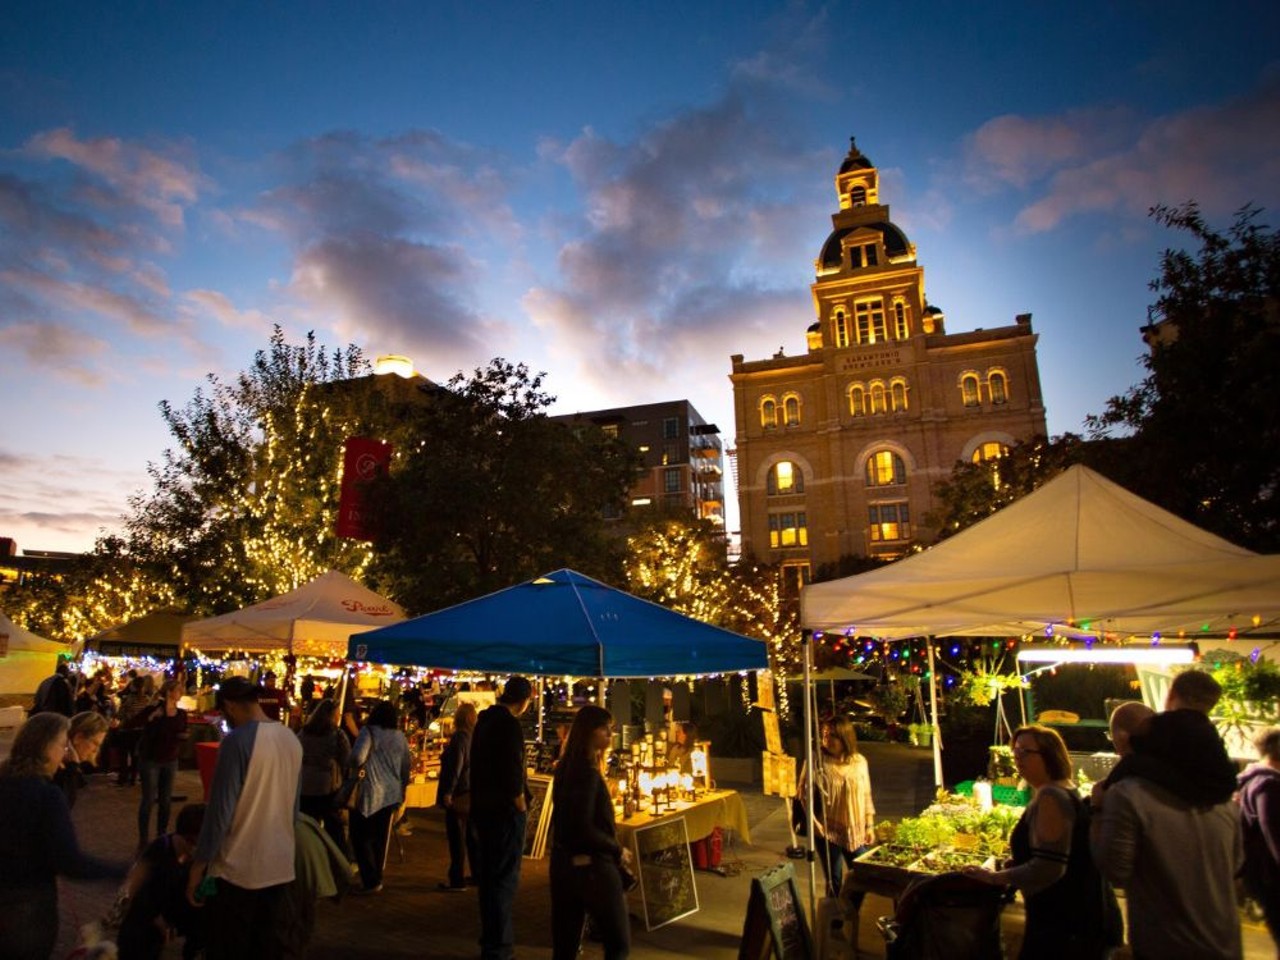 Visit a Pearl Holiday Night Market
The Pearl puts on a night market in the four Wednesdays running up to Christmas, featuring live music, carolers, and over 60 local vendors. Grab something to eat, enjoy the live music and indulge in some laid-back Christmas shopping.